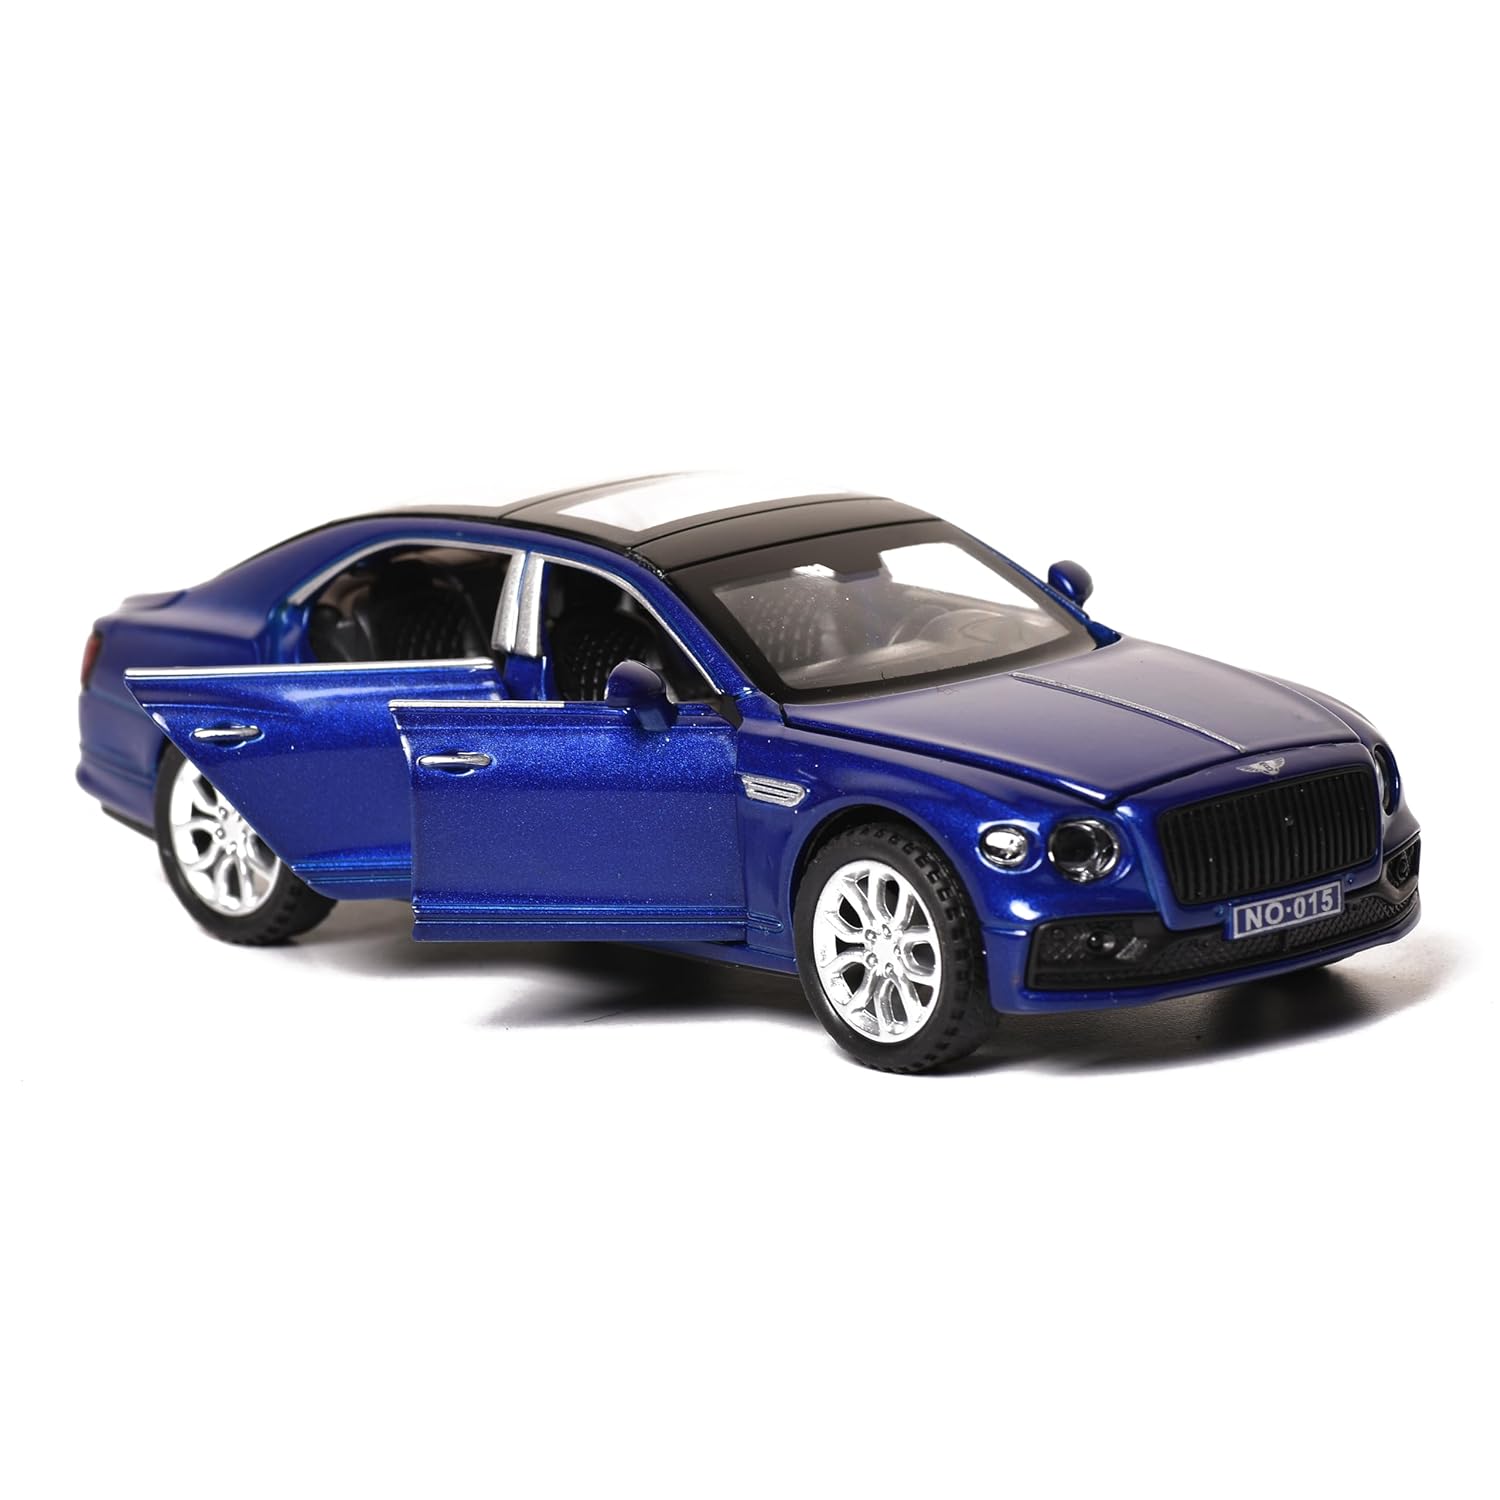 Braintastic Bentley Diecast Alloy Model Car Pull Back Collectible Toy Vehicles with Sound and Light Door Opened for Kids Age 3+ Years Blue